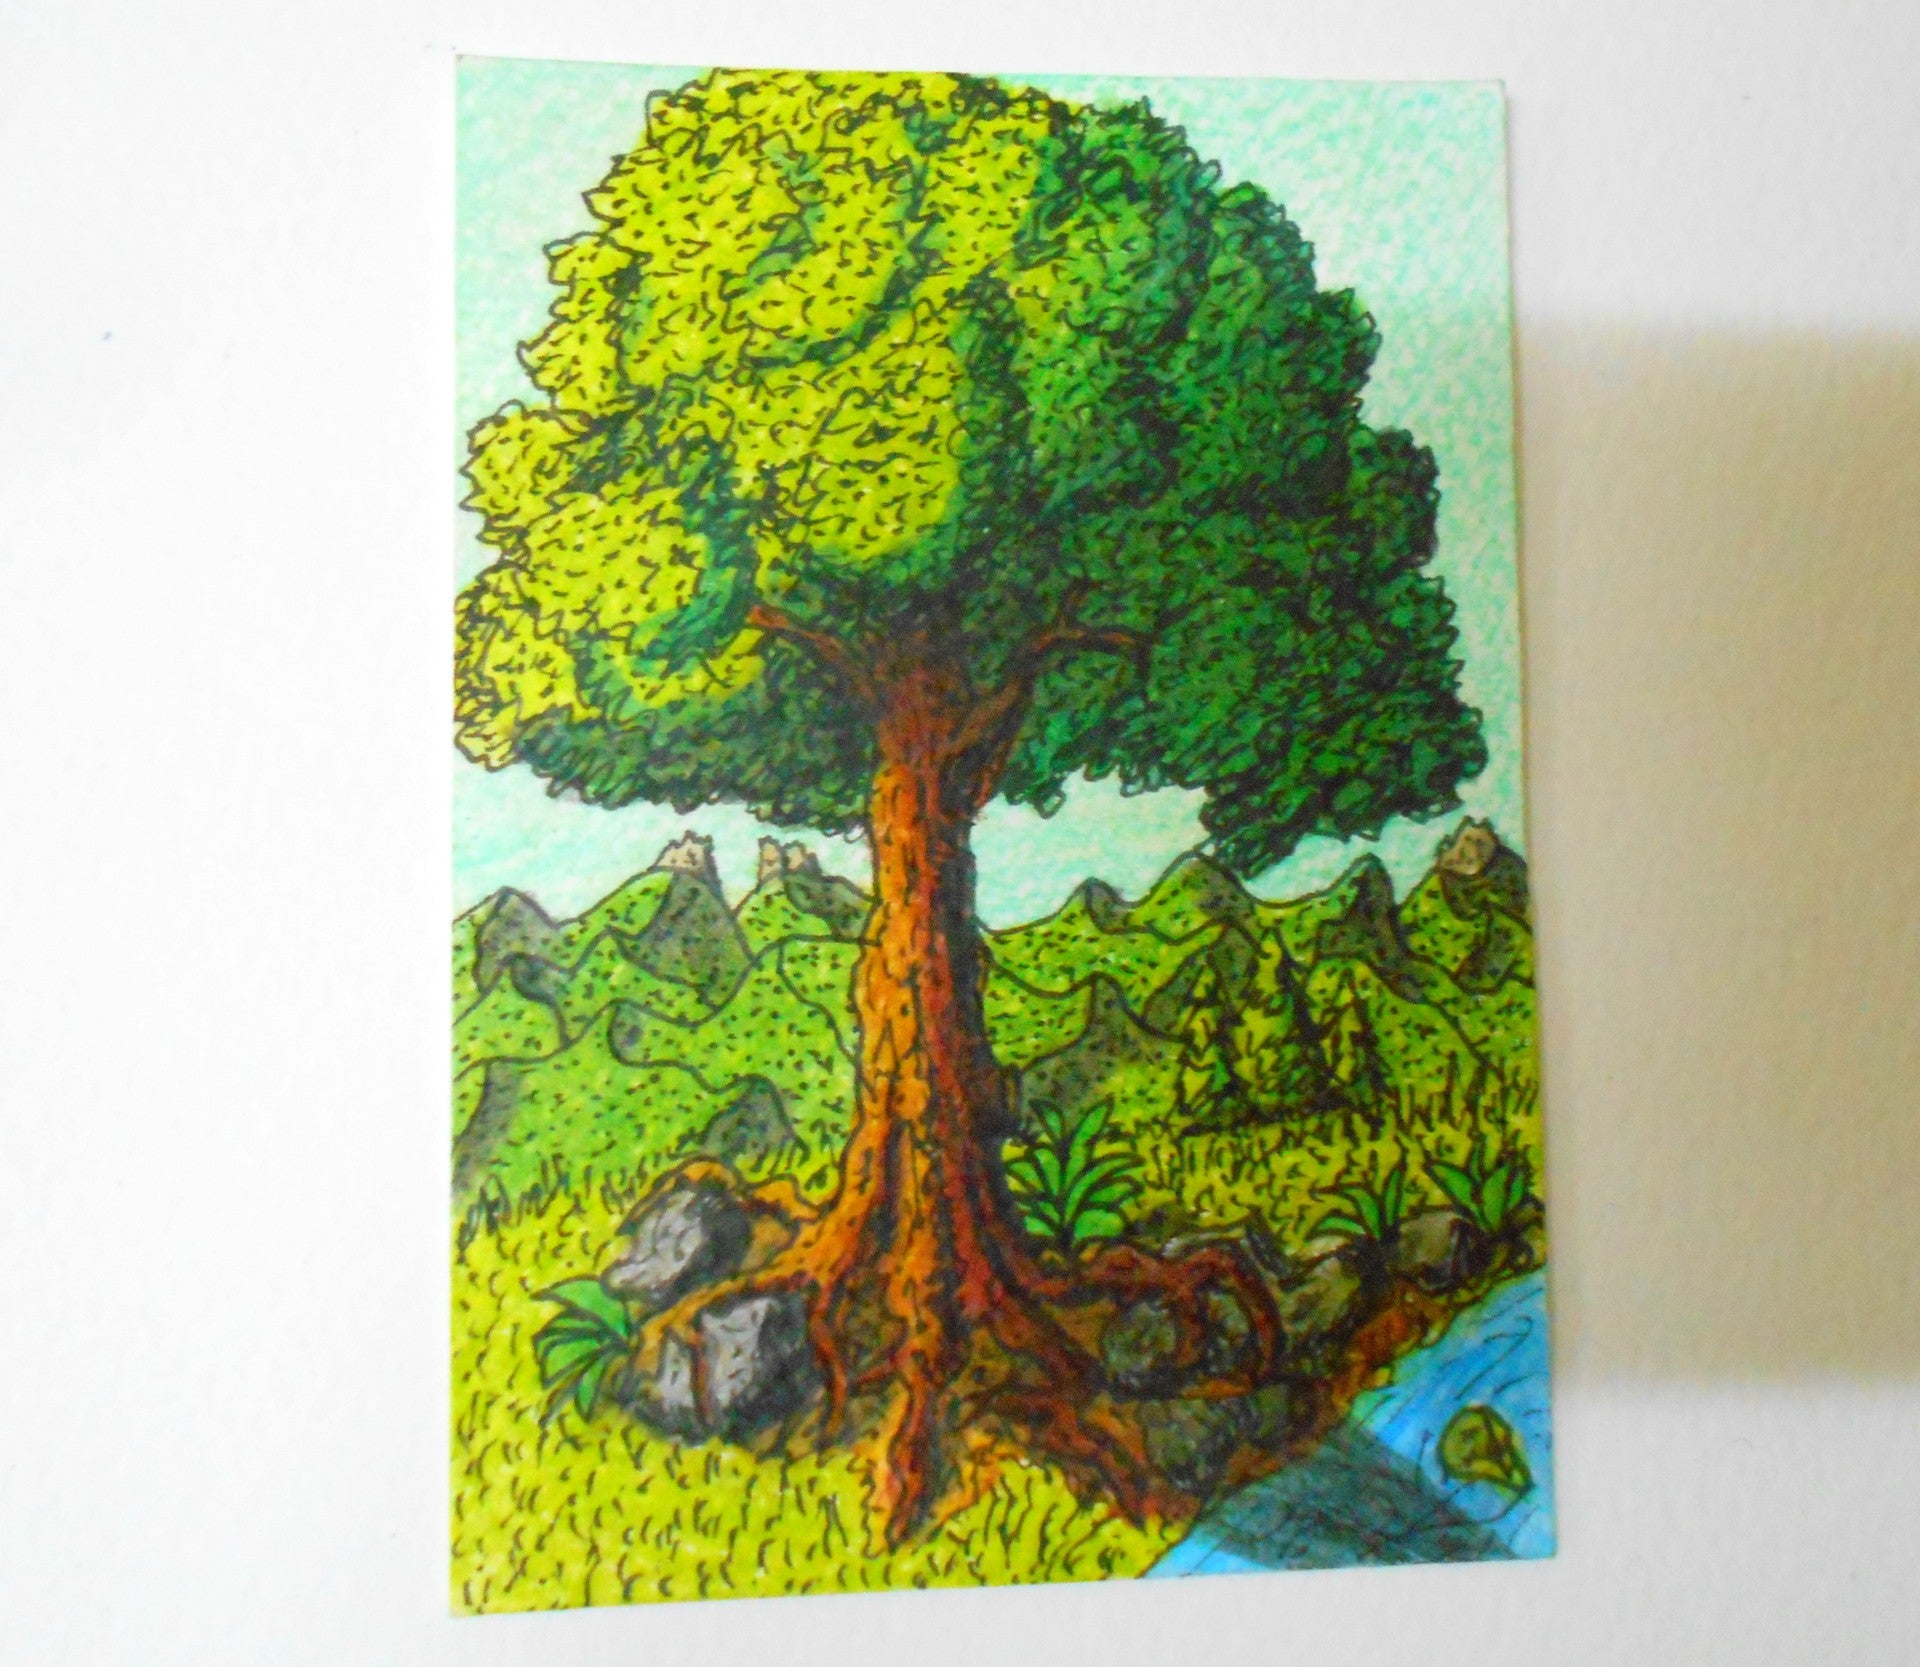 Original black ink and colored pencils artwork of an oak tree and a mountain landscape by Hristo Hvoynev from Bulgaria